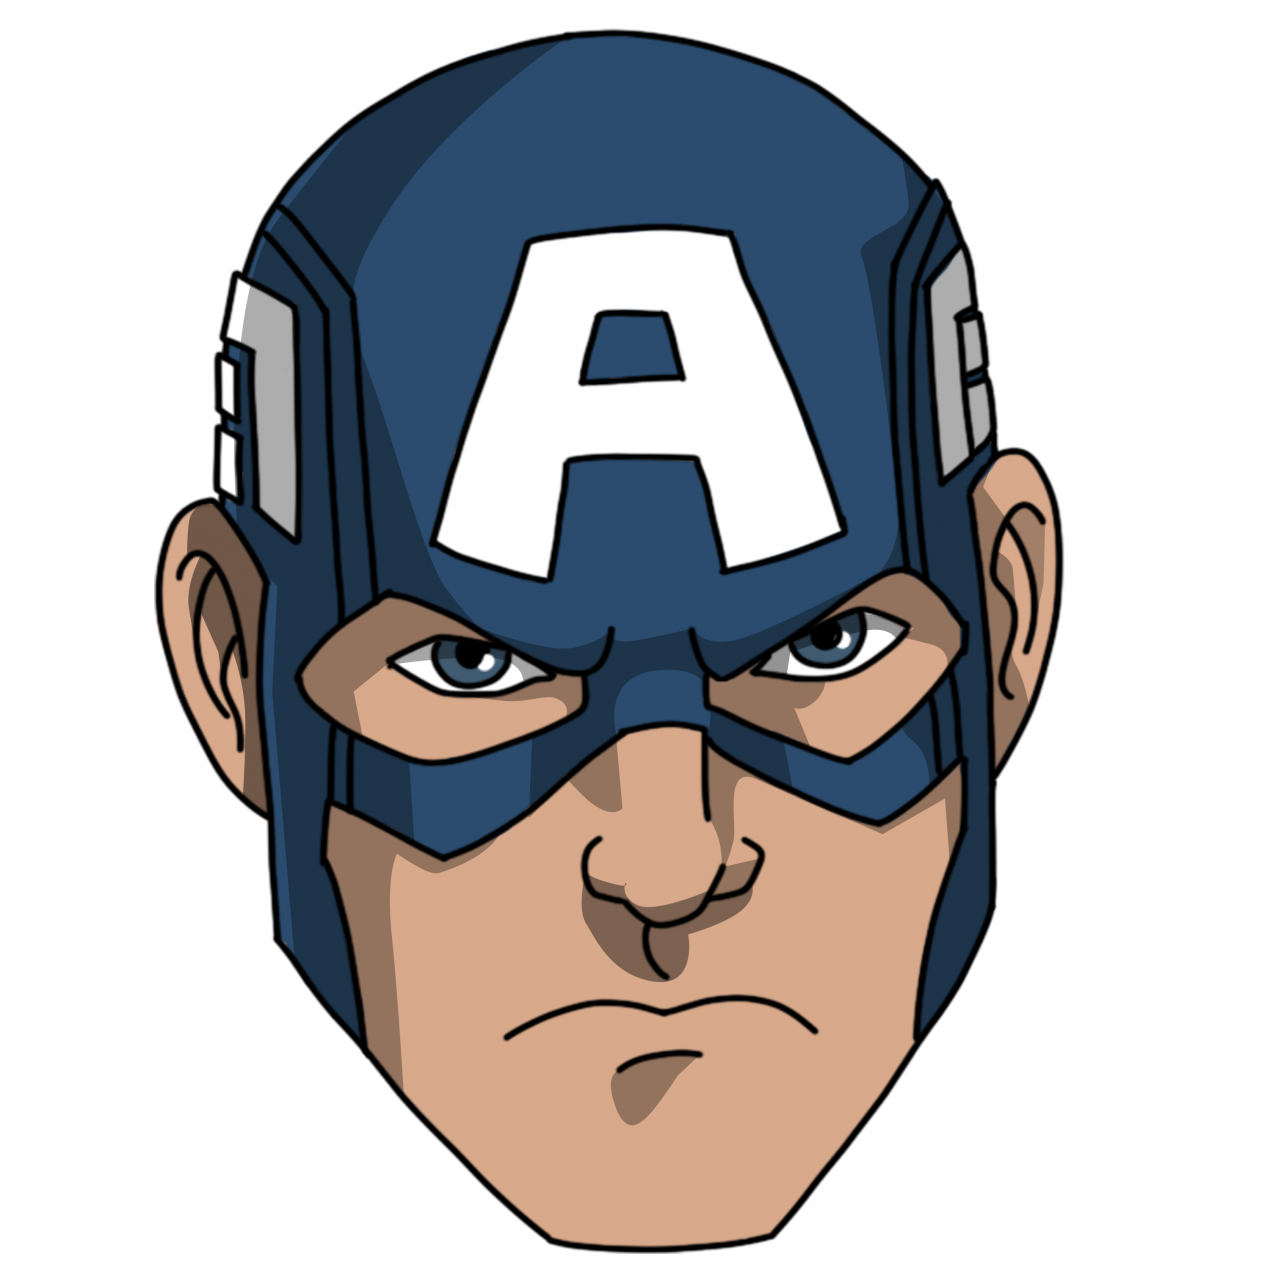 Ways to draw captain america face portrait full body and chibi style